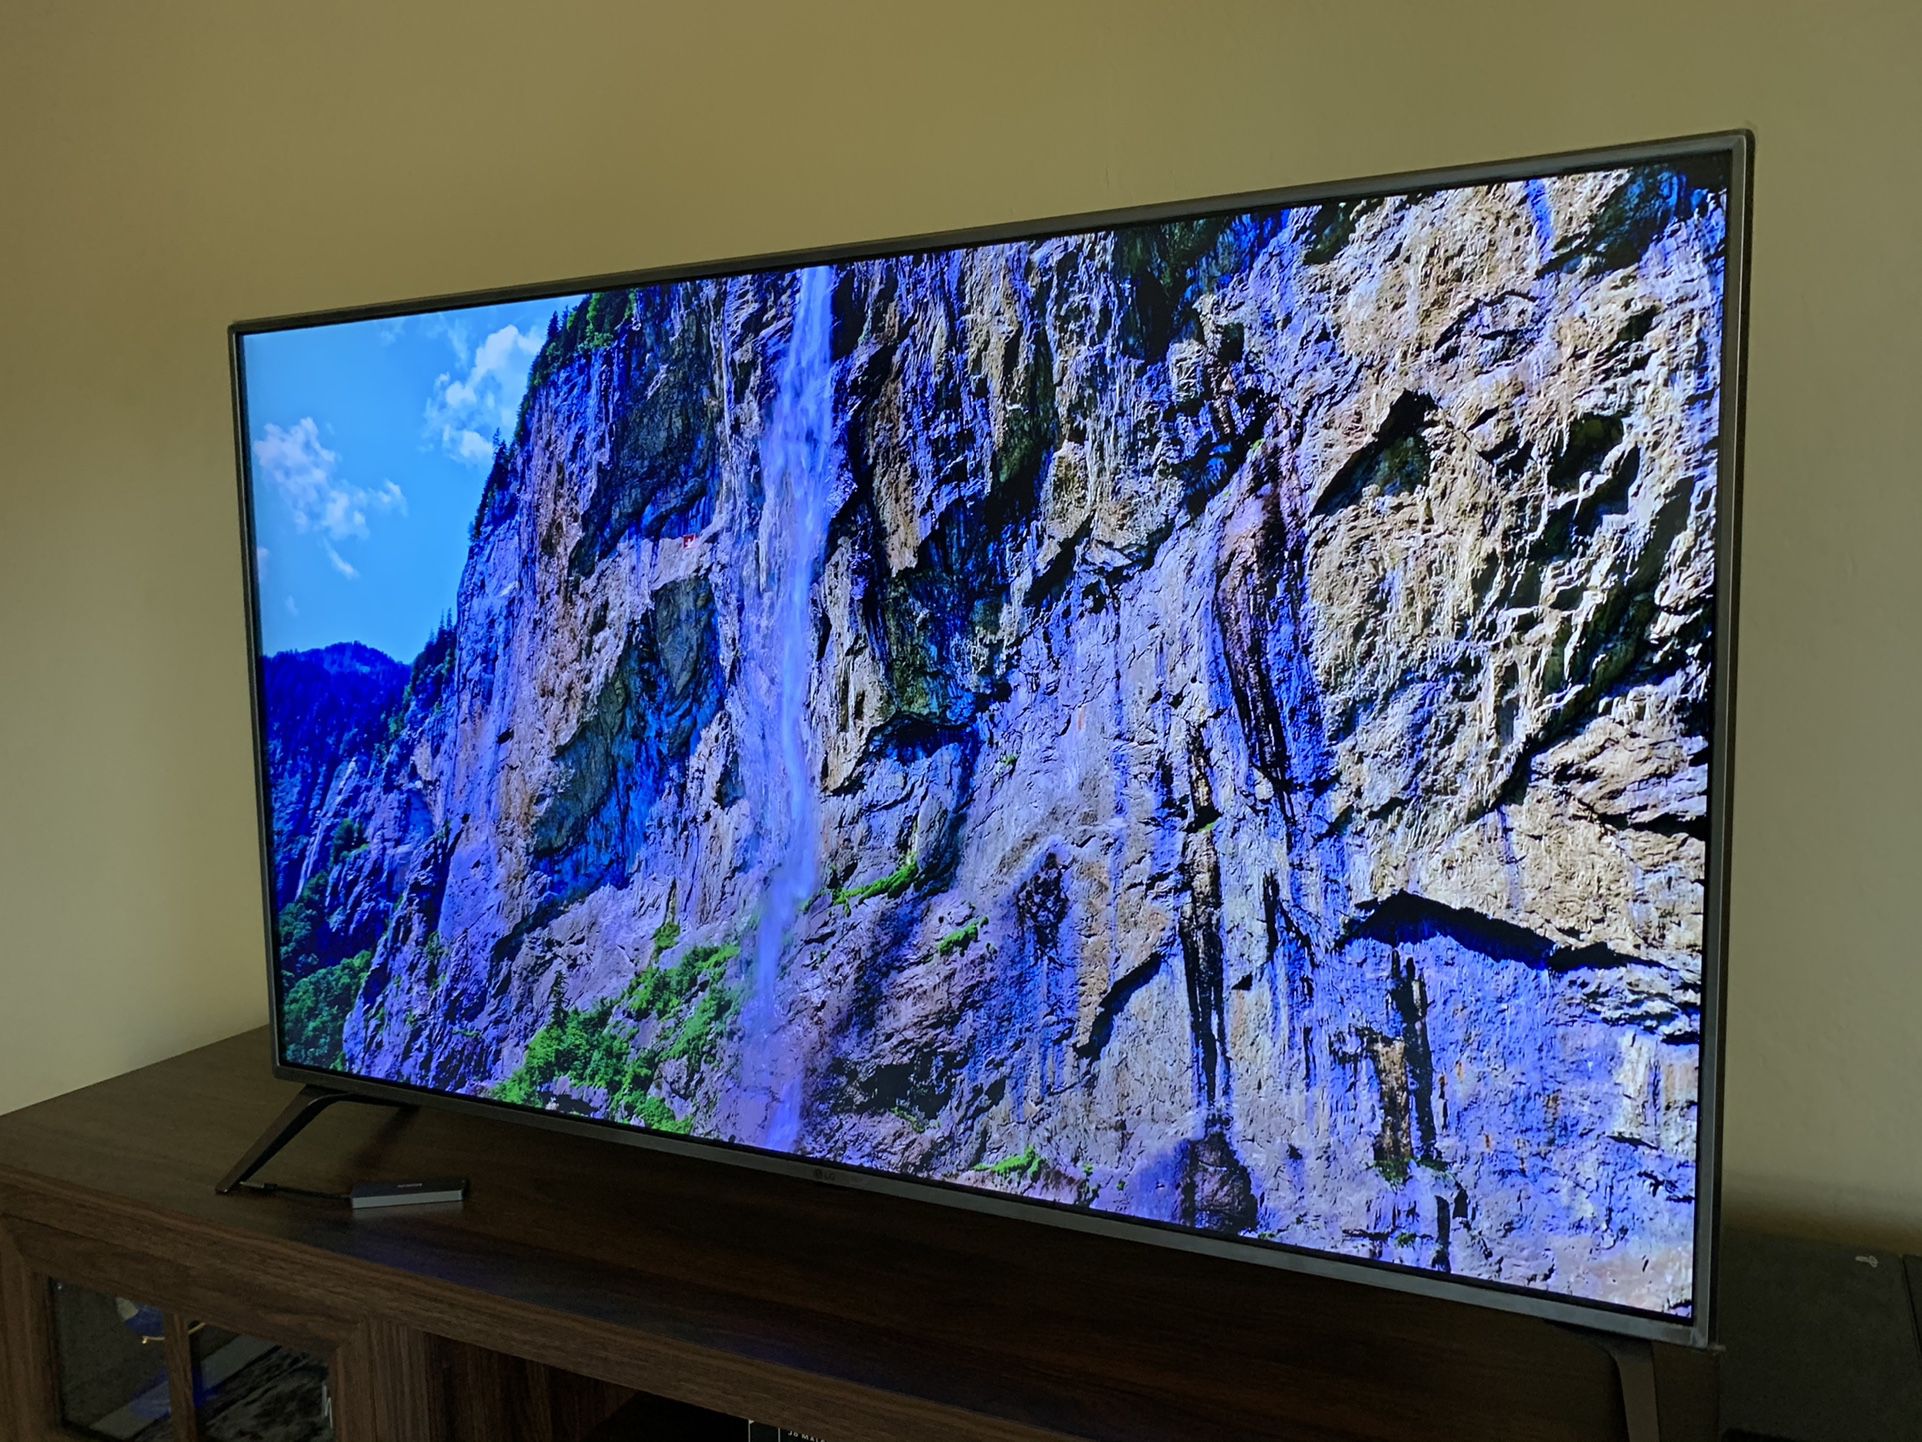 LG UBKM9 Streaming 4K Ultra HD Audio Blu-Ray with Dolby Vision - Black New  for Sale in El Centro, CA - OfferUp